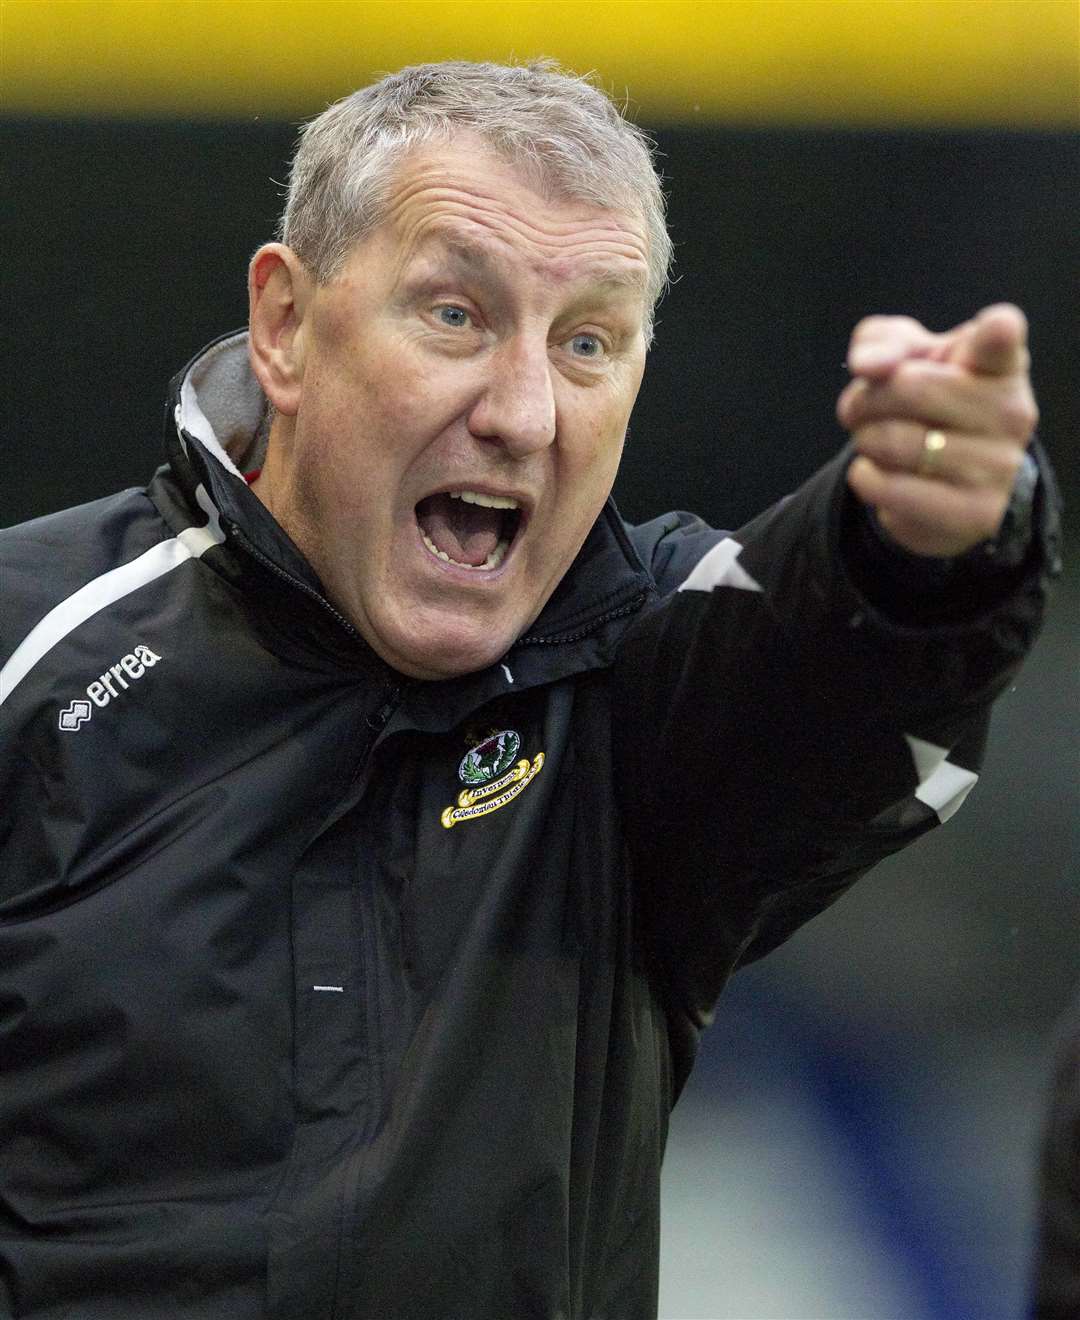 Furious ... ICT manager Terry Butcher could do angry as well as happy.